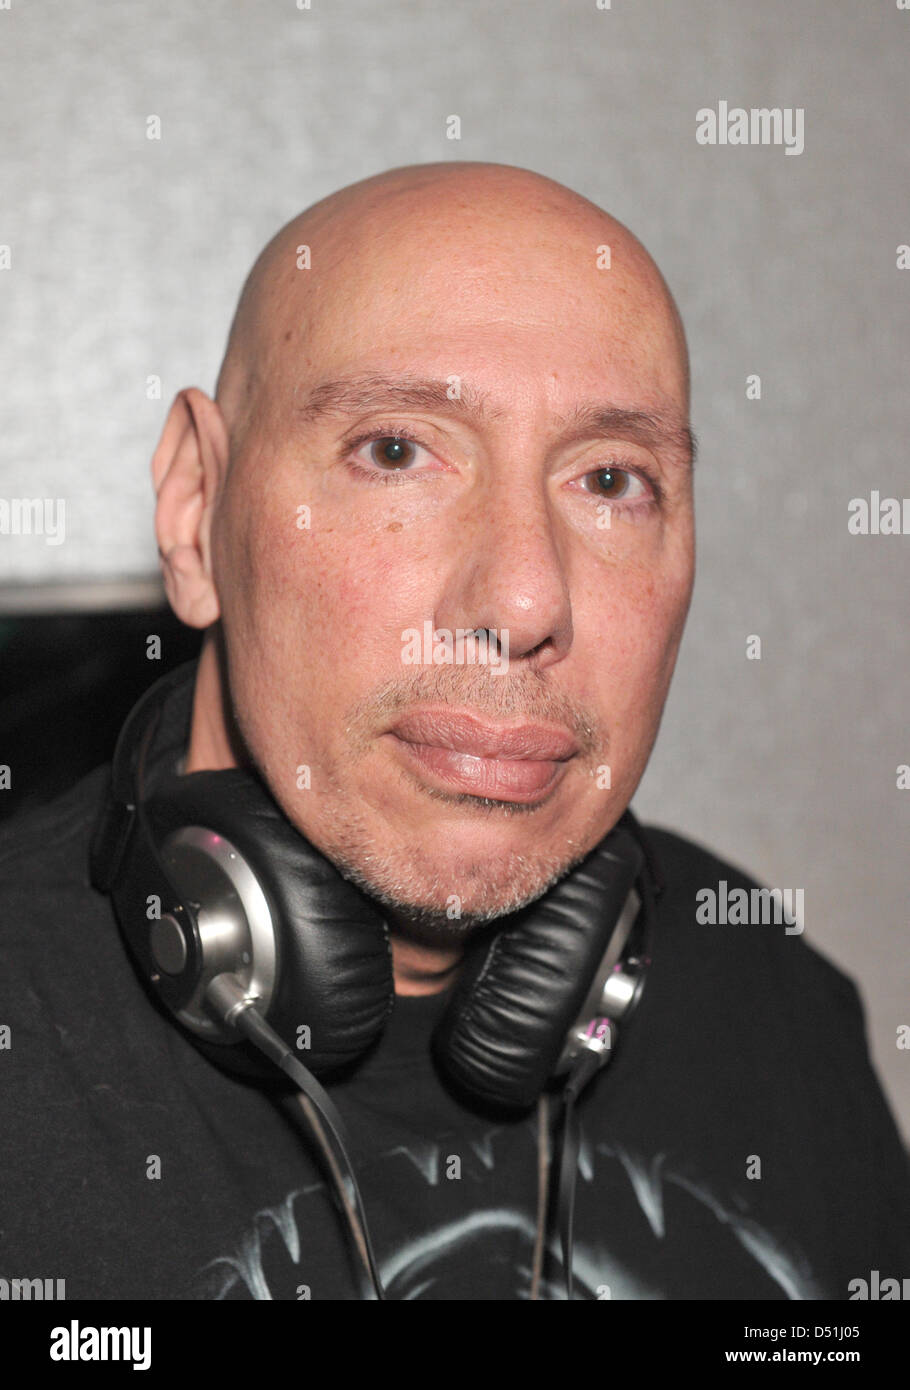 US DJ Nicky Siano poses in P1 nightclub in Munich, Germany, 16 December 2010. Siano was a resident at famous Studio 54. Photo: Felix Hoerhager Stock Photo